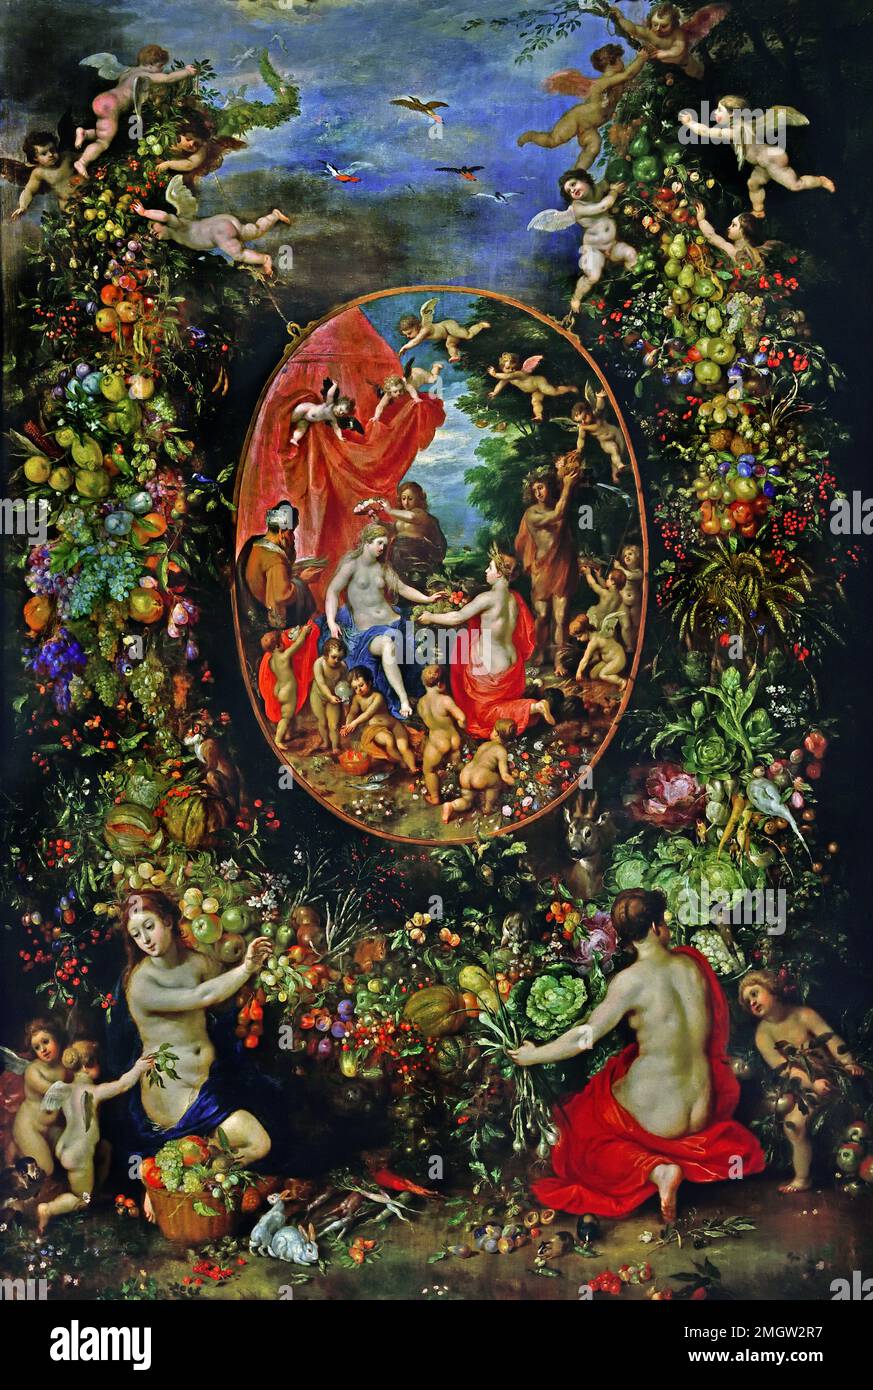 Jan Brueghel the Elder & Hendrik van Balen Garland of Fruit surrounding a Depiction of Cybele Receiving Gifts from Personifications of the Four Seasons c. 1620-1622  Belgian, Belgium, Flemish, Medallion depicts Cybele, Goddess, Earth and Nature, Around the medallion hangs a garland of flowers, vegetables and fruit , Tribute to the goddess , ode to plenty and fertility Stock Photo